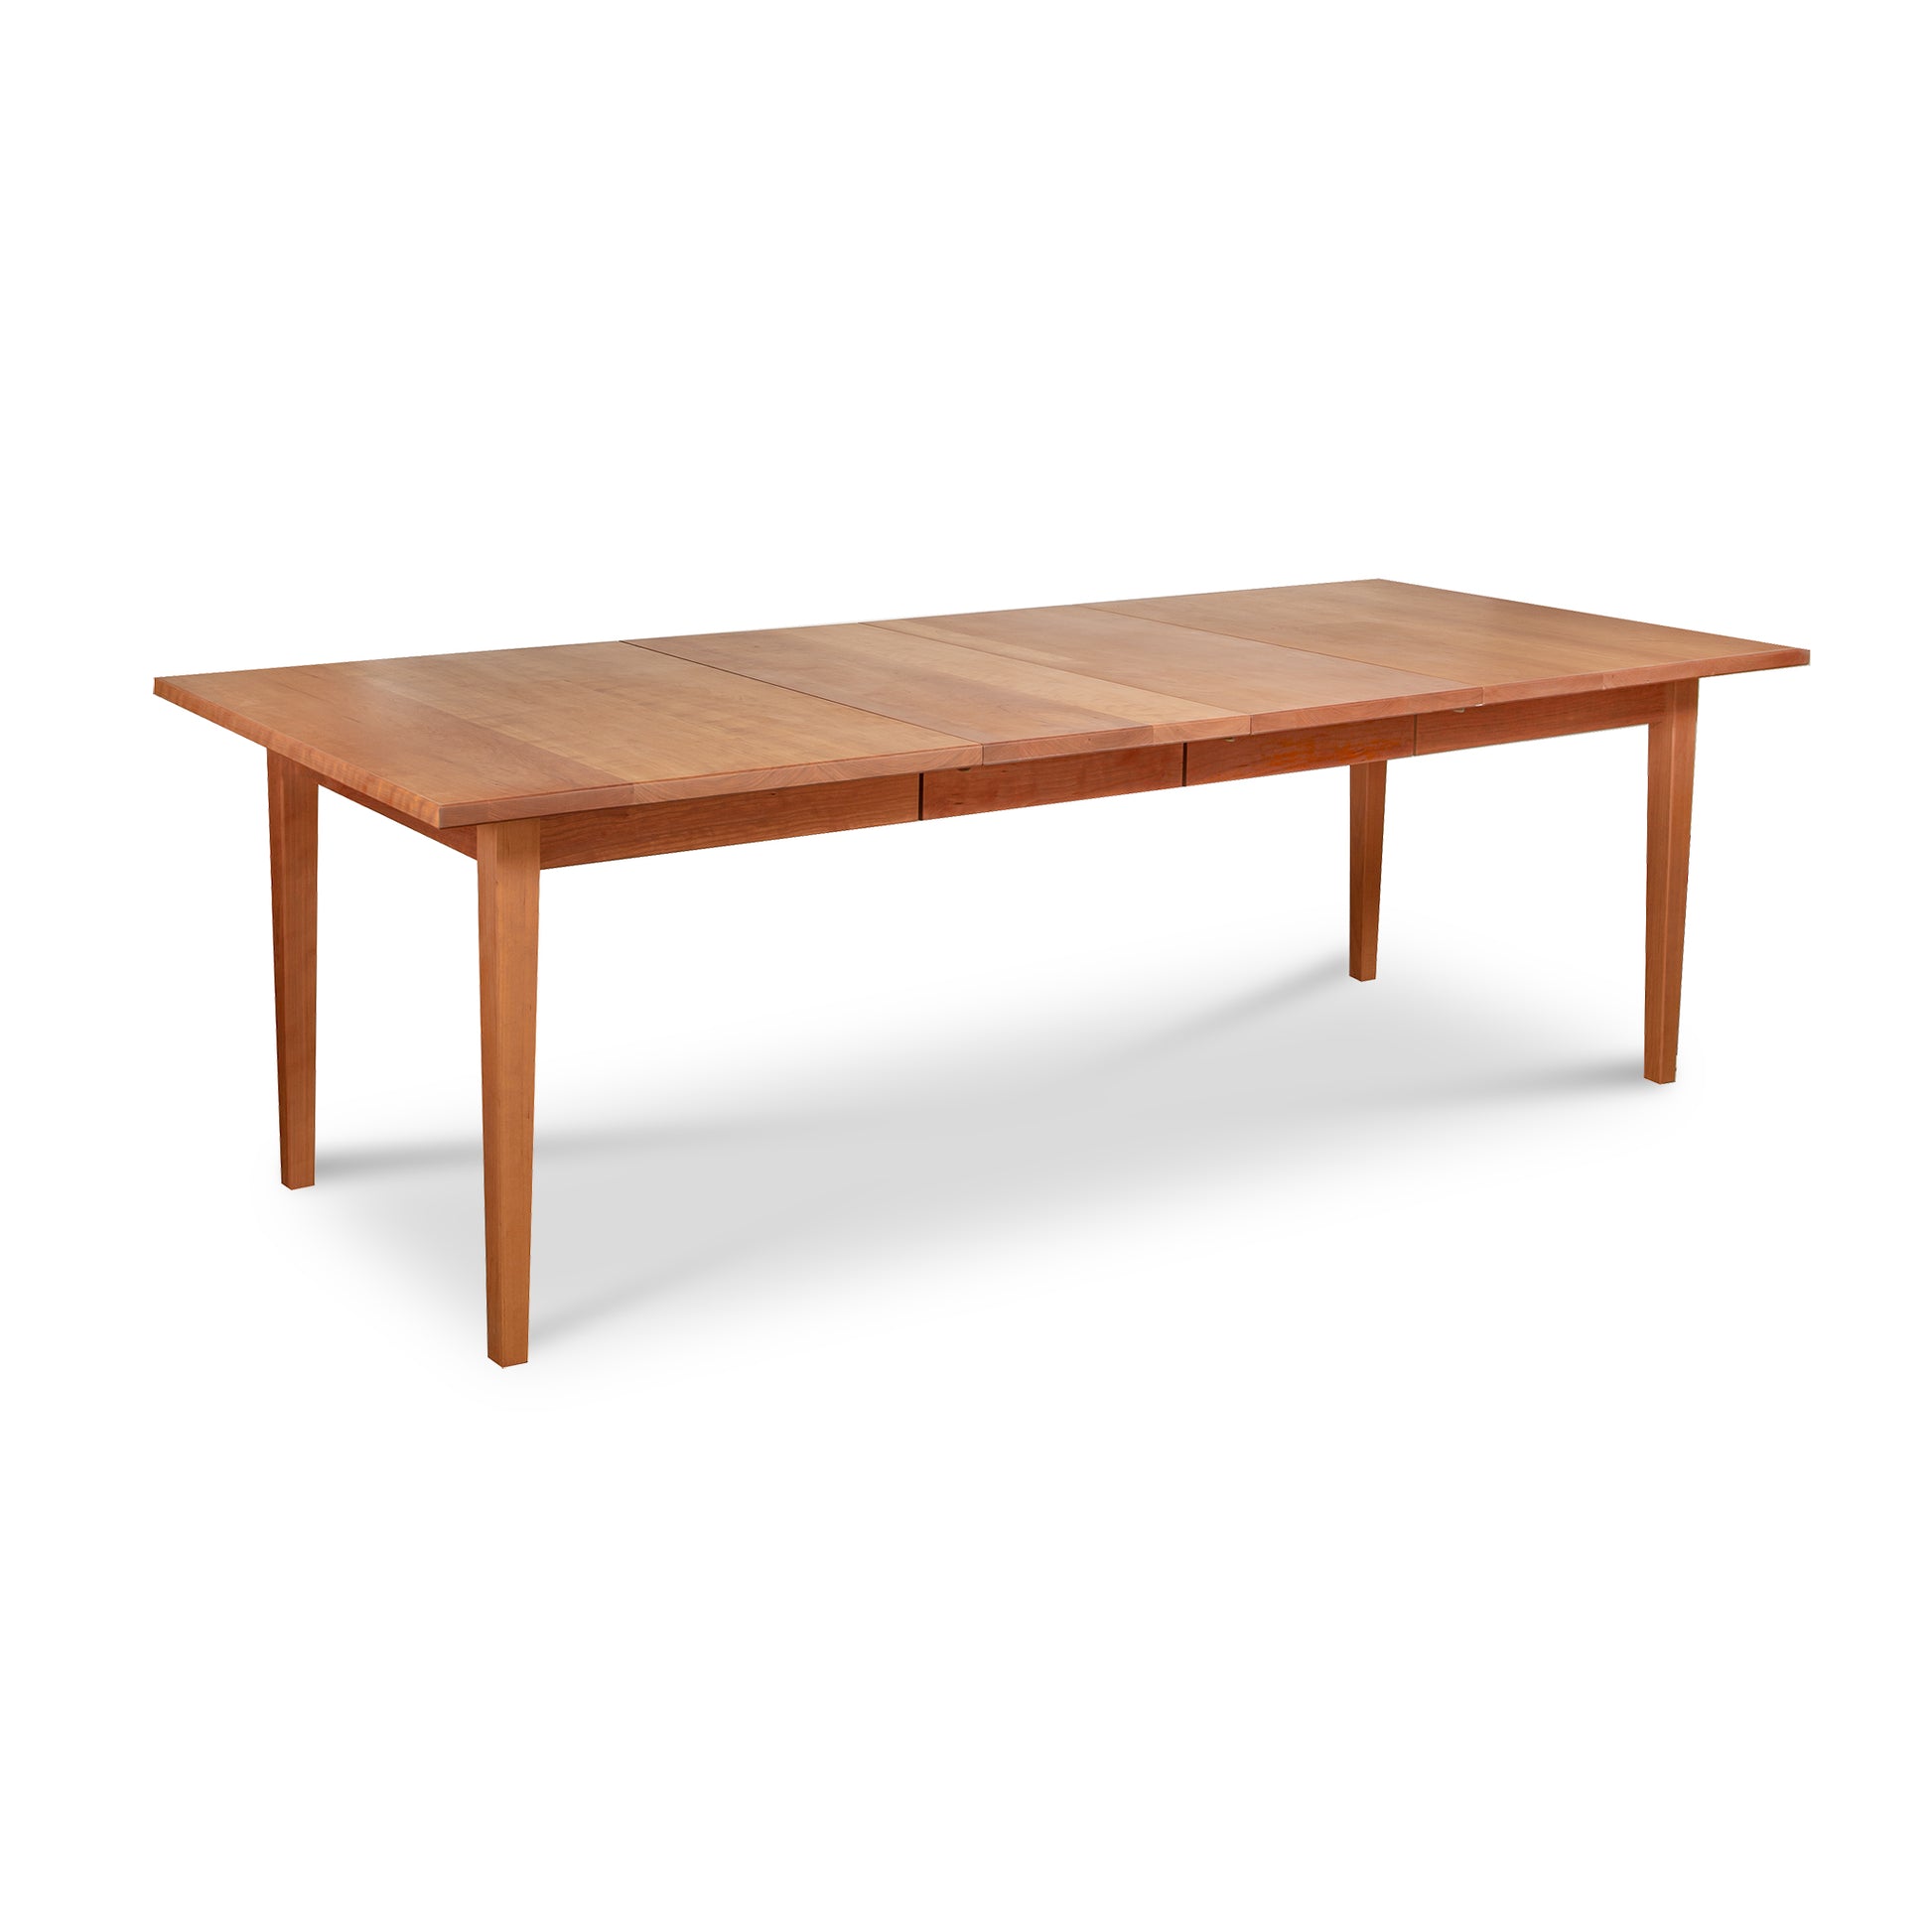 A Vermont Shaker Rectangular Extension Dining Table crafted from sustainably harvested wood with an extendable middle section, set against a white background. The table has a smooth finish and slender, tapered legs by Maple Corner Woodworks.